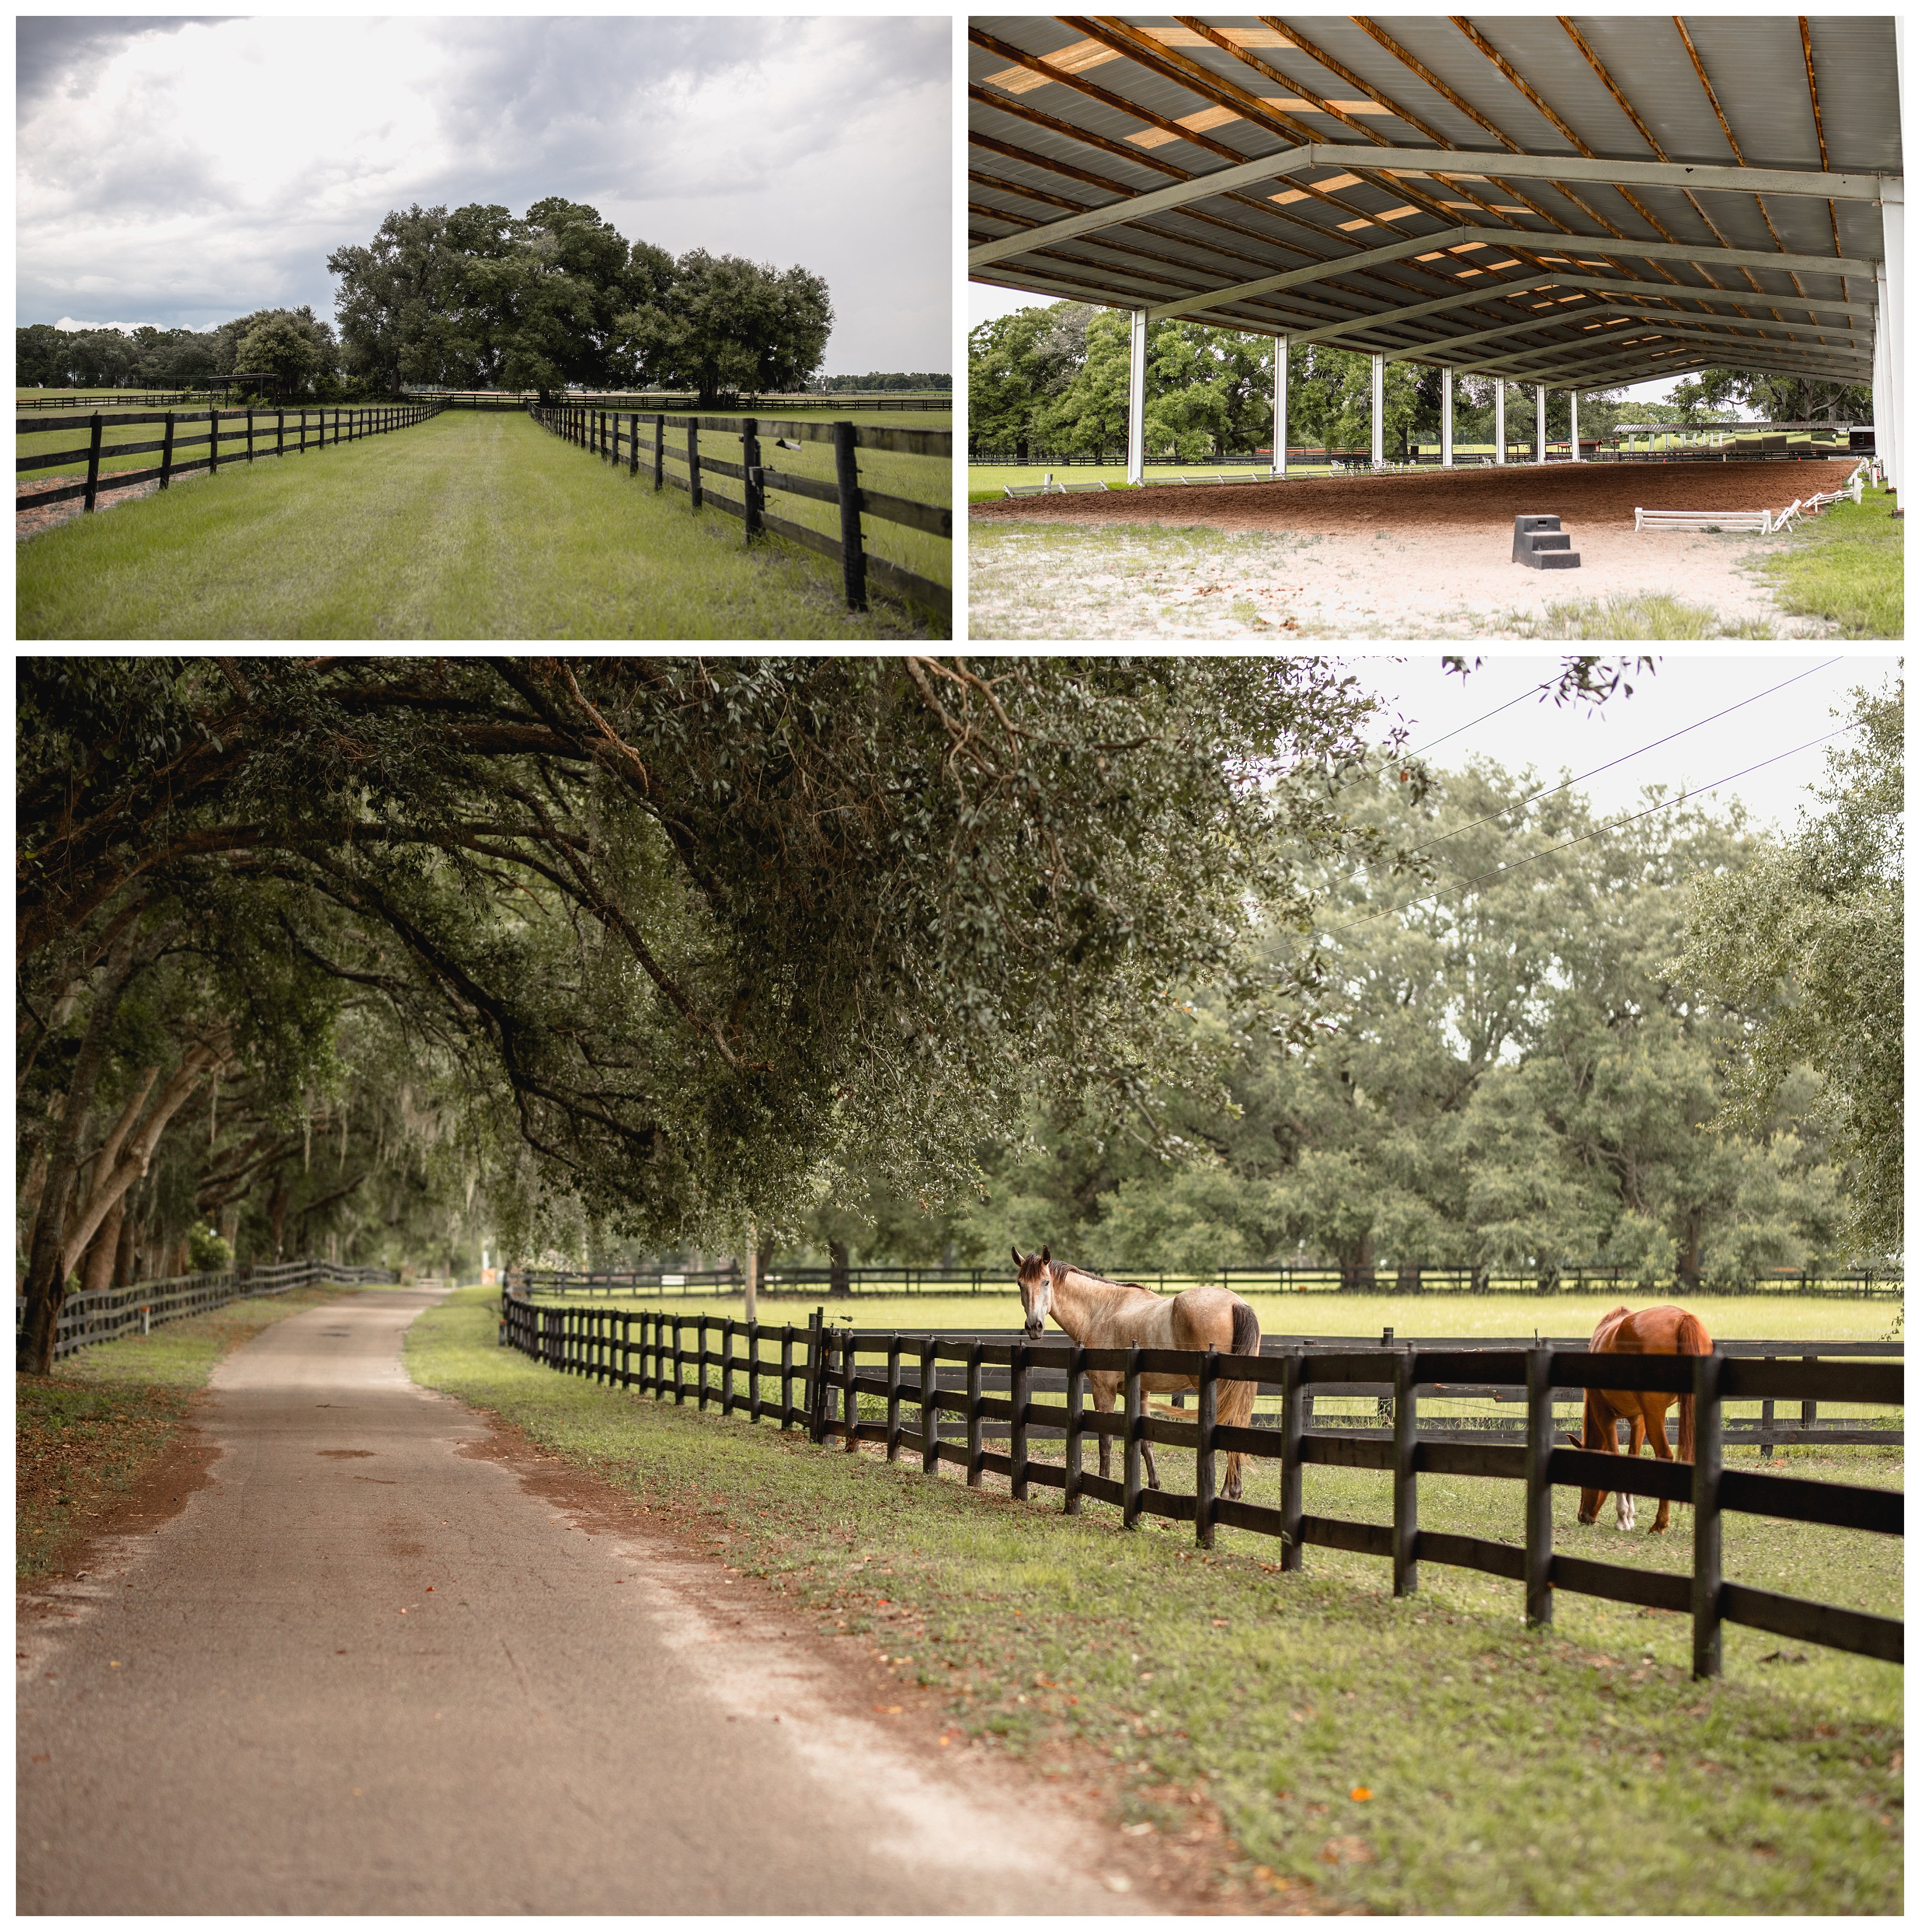 KYB Dressage, professional horse training in north florida on beautiful, large facility